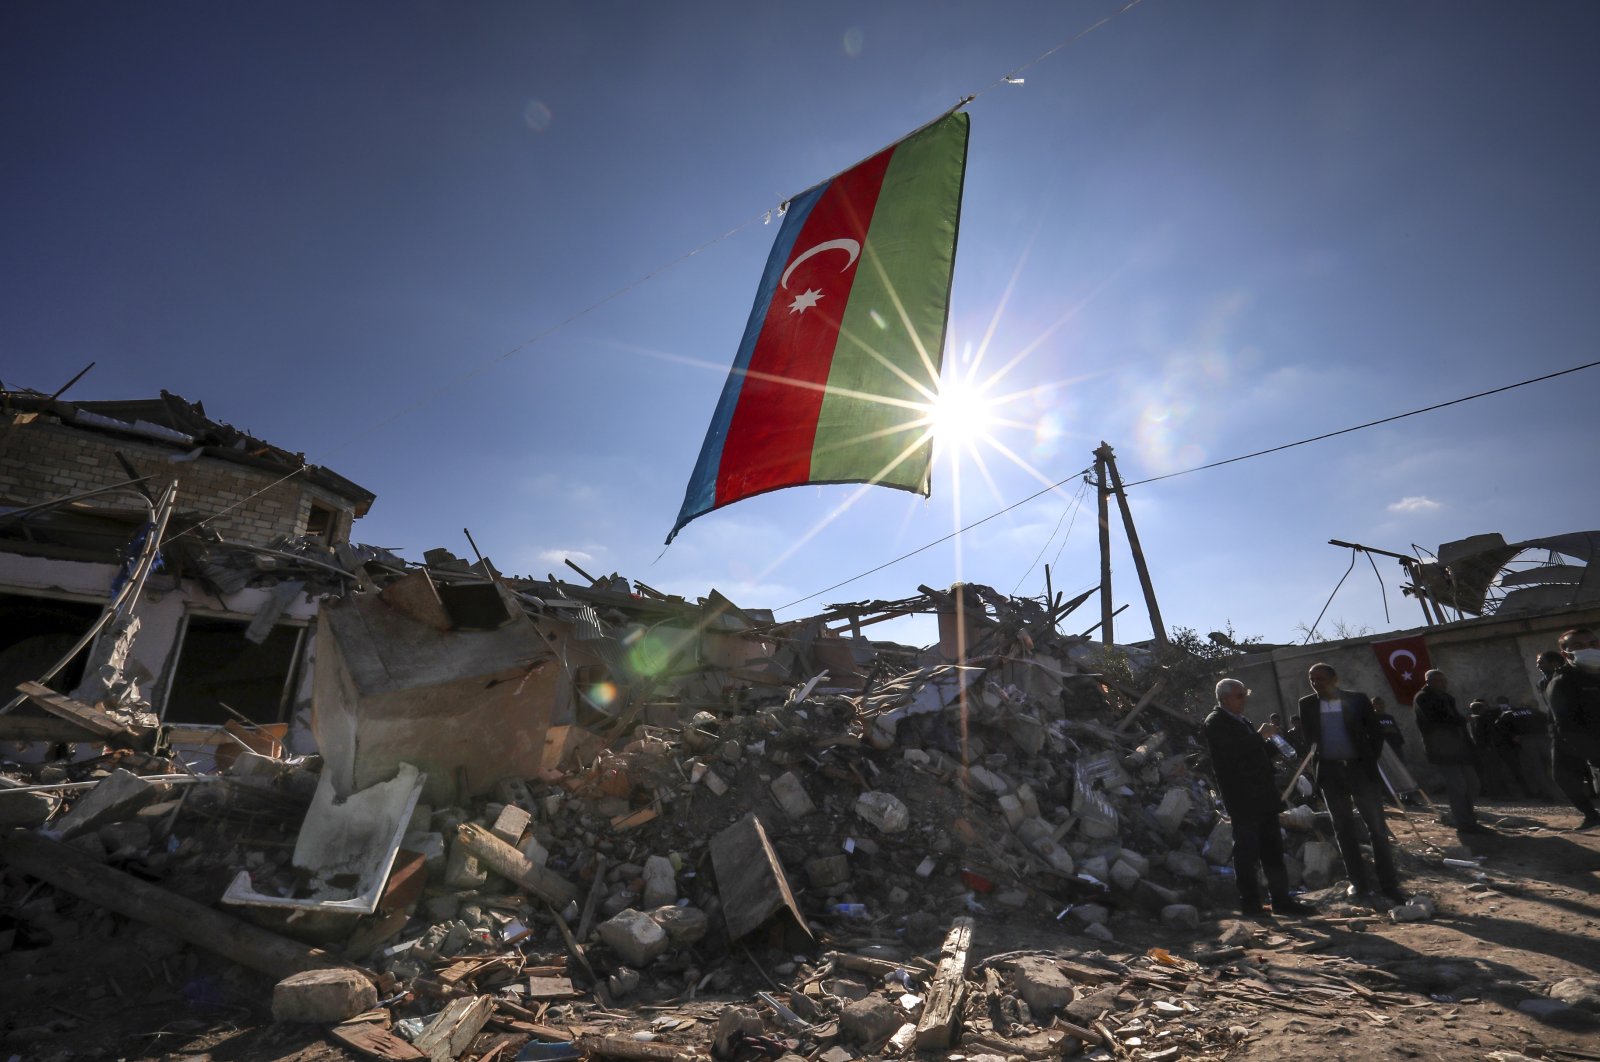 Azerbaijan's national flag flies over destroyed houses in a residential area that was hit by rocket fire overnight by Armenian forces, on Thursday, Oct. 22, 2020 in Ganja, Azerbaijan's second largest city, near the border with Armenia. (AP Photo)